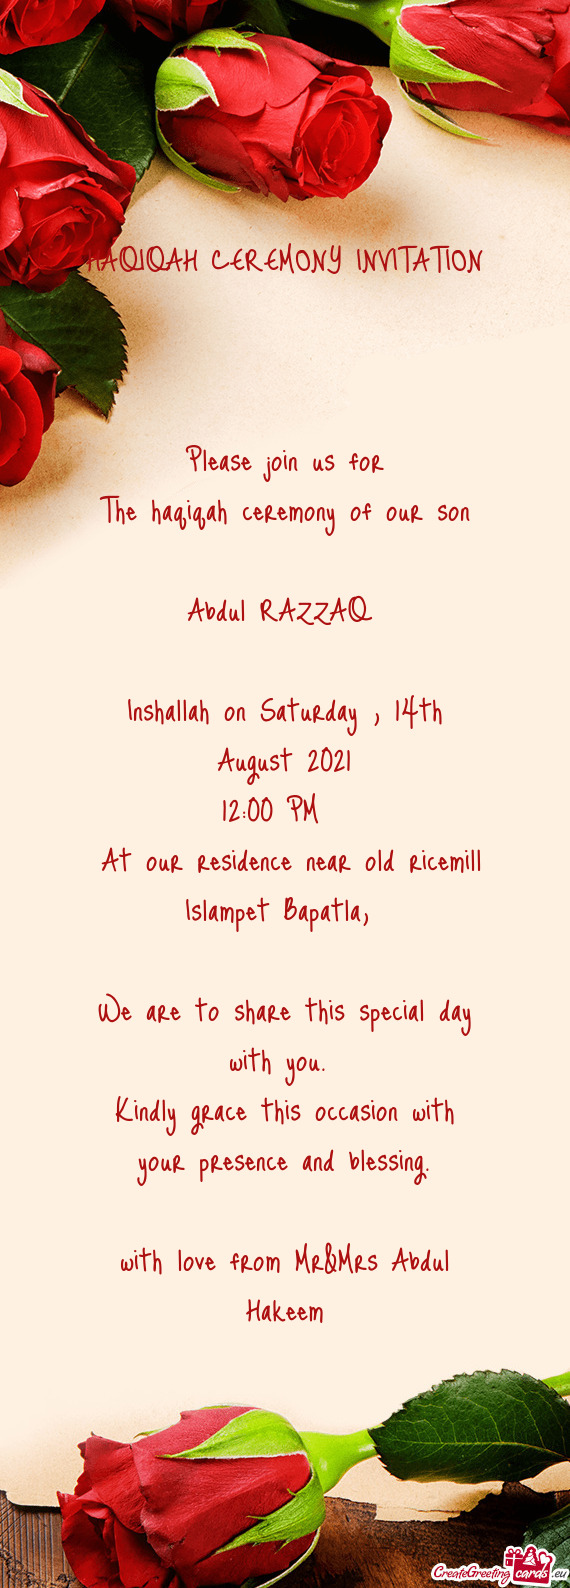 Inshallah on Saturday , 14th August 2021